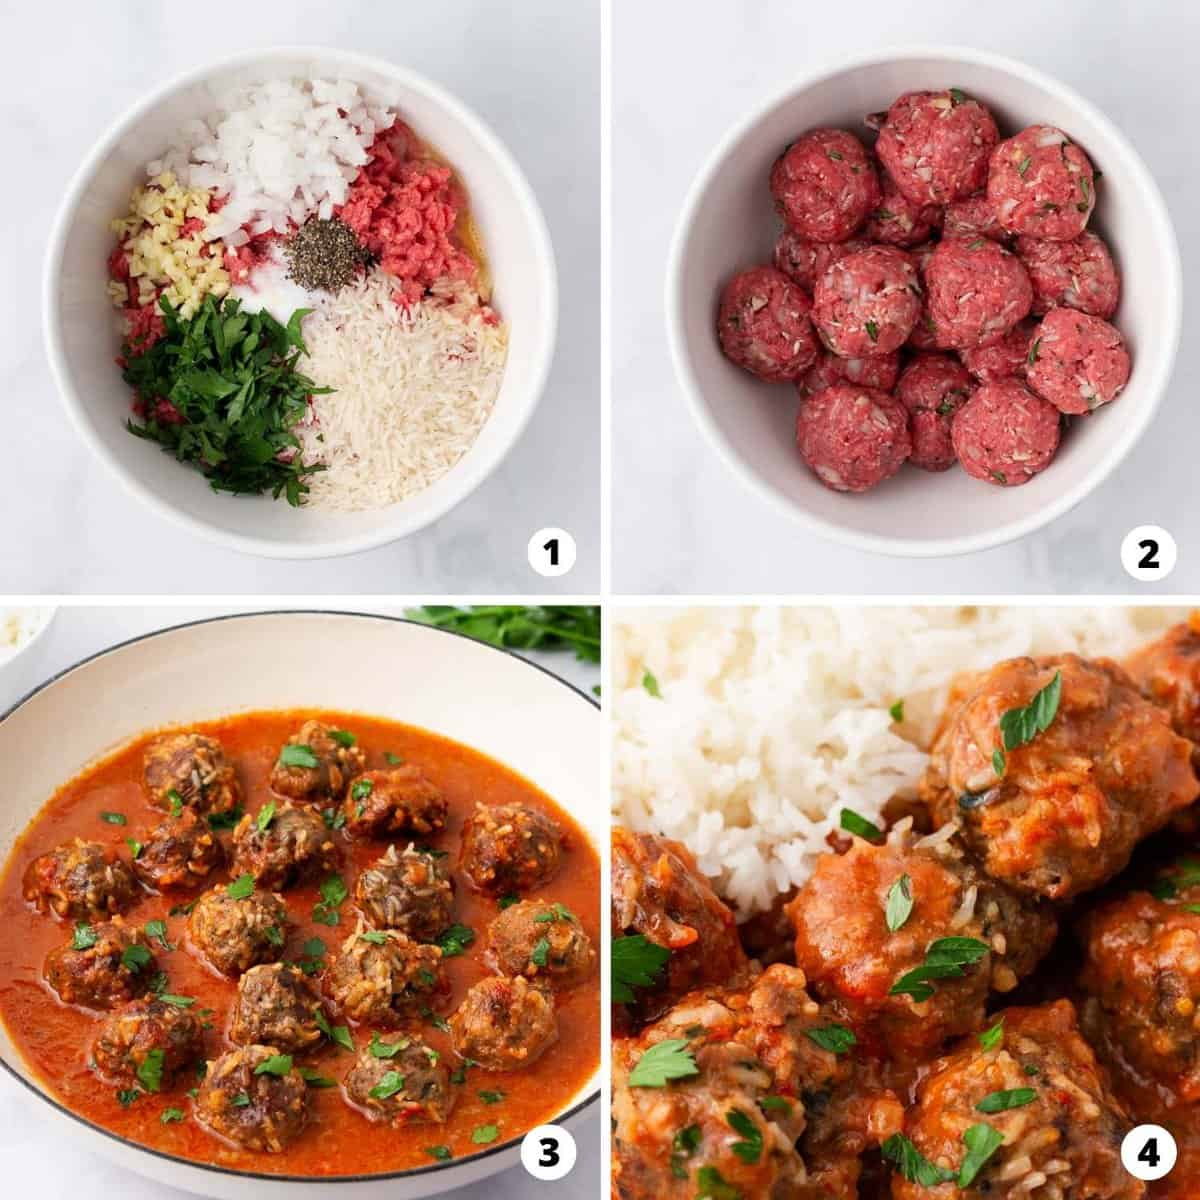 The process of how to make porcupine meatballs in a 4 step collage.